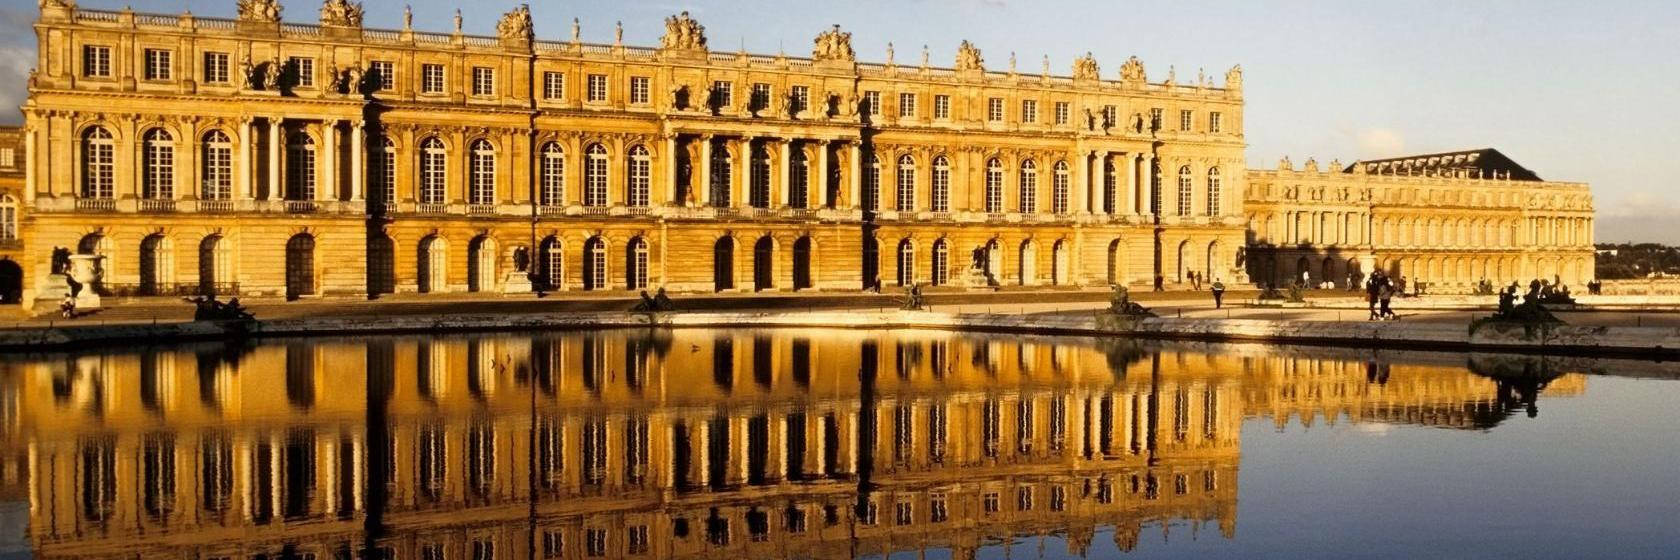 Majestic View Of The Pool Near The Palace Of Versailles Wallpaper